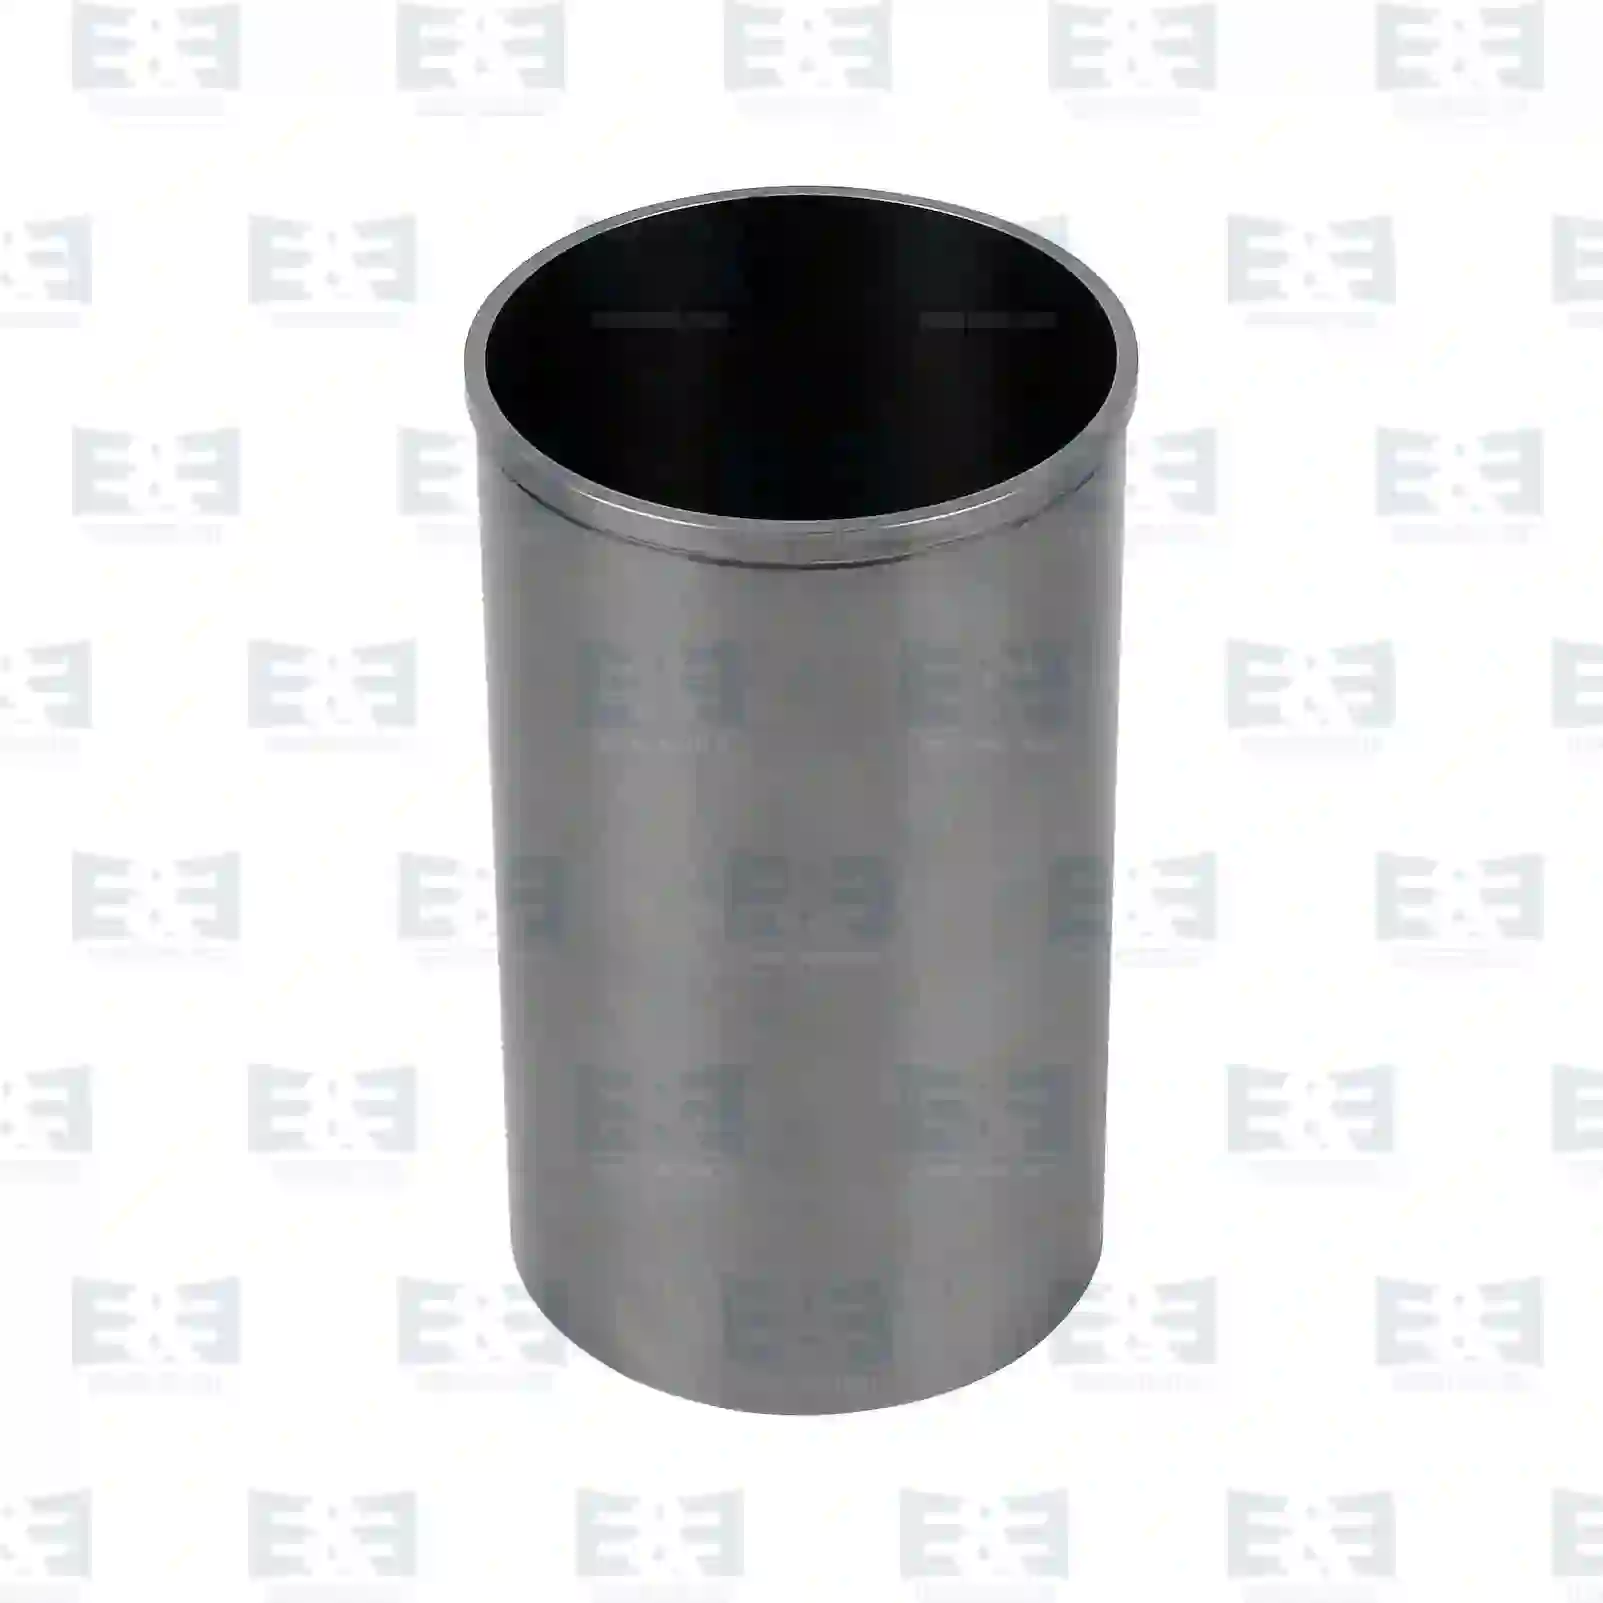 Cylinder liner, without seal rings, 2E2208927, 6010110210, 6010110310, 6020110310 ||  2E2208927 E&E Truck Spare Parts | Truck Spare Parts, Auotomotive Spare Parts Cylinder liner, without seal rings, 2E2208927, 6010110210, 6010110310, 6020110310 ||  2E2208927 E&E Truck Spare Parts | Truck Spare Parts, Auotomotive Spare Parts